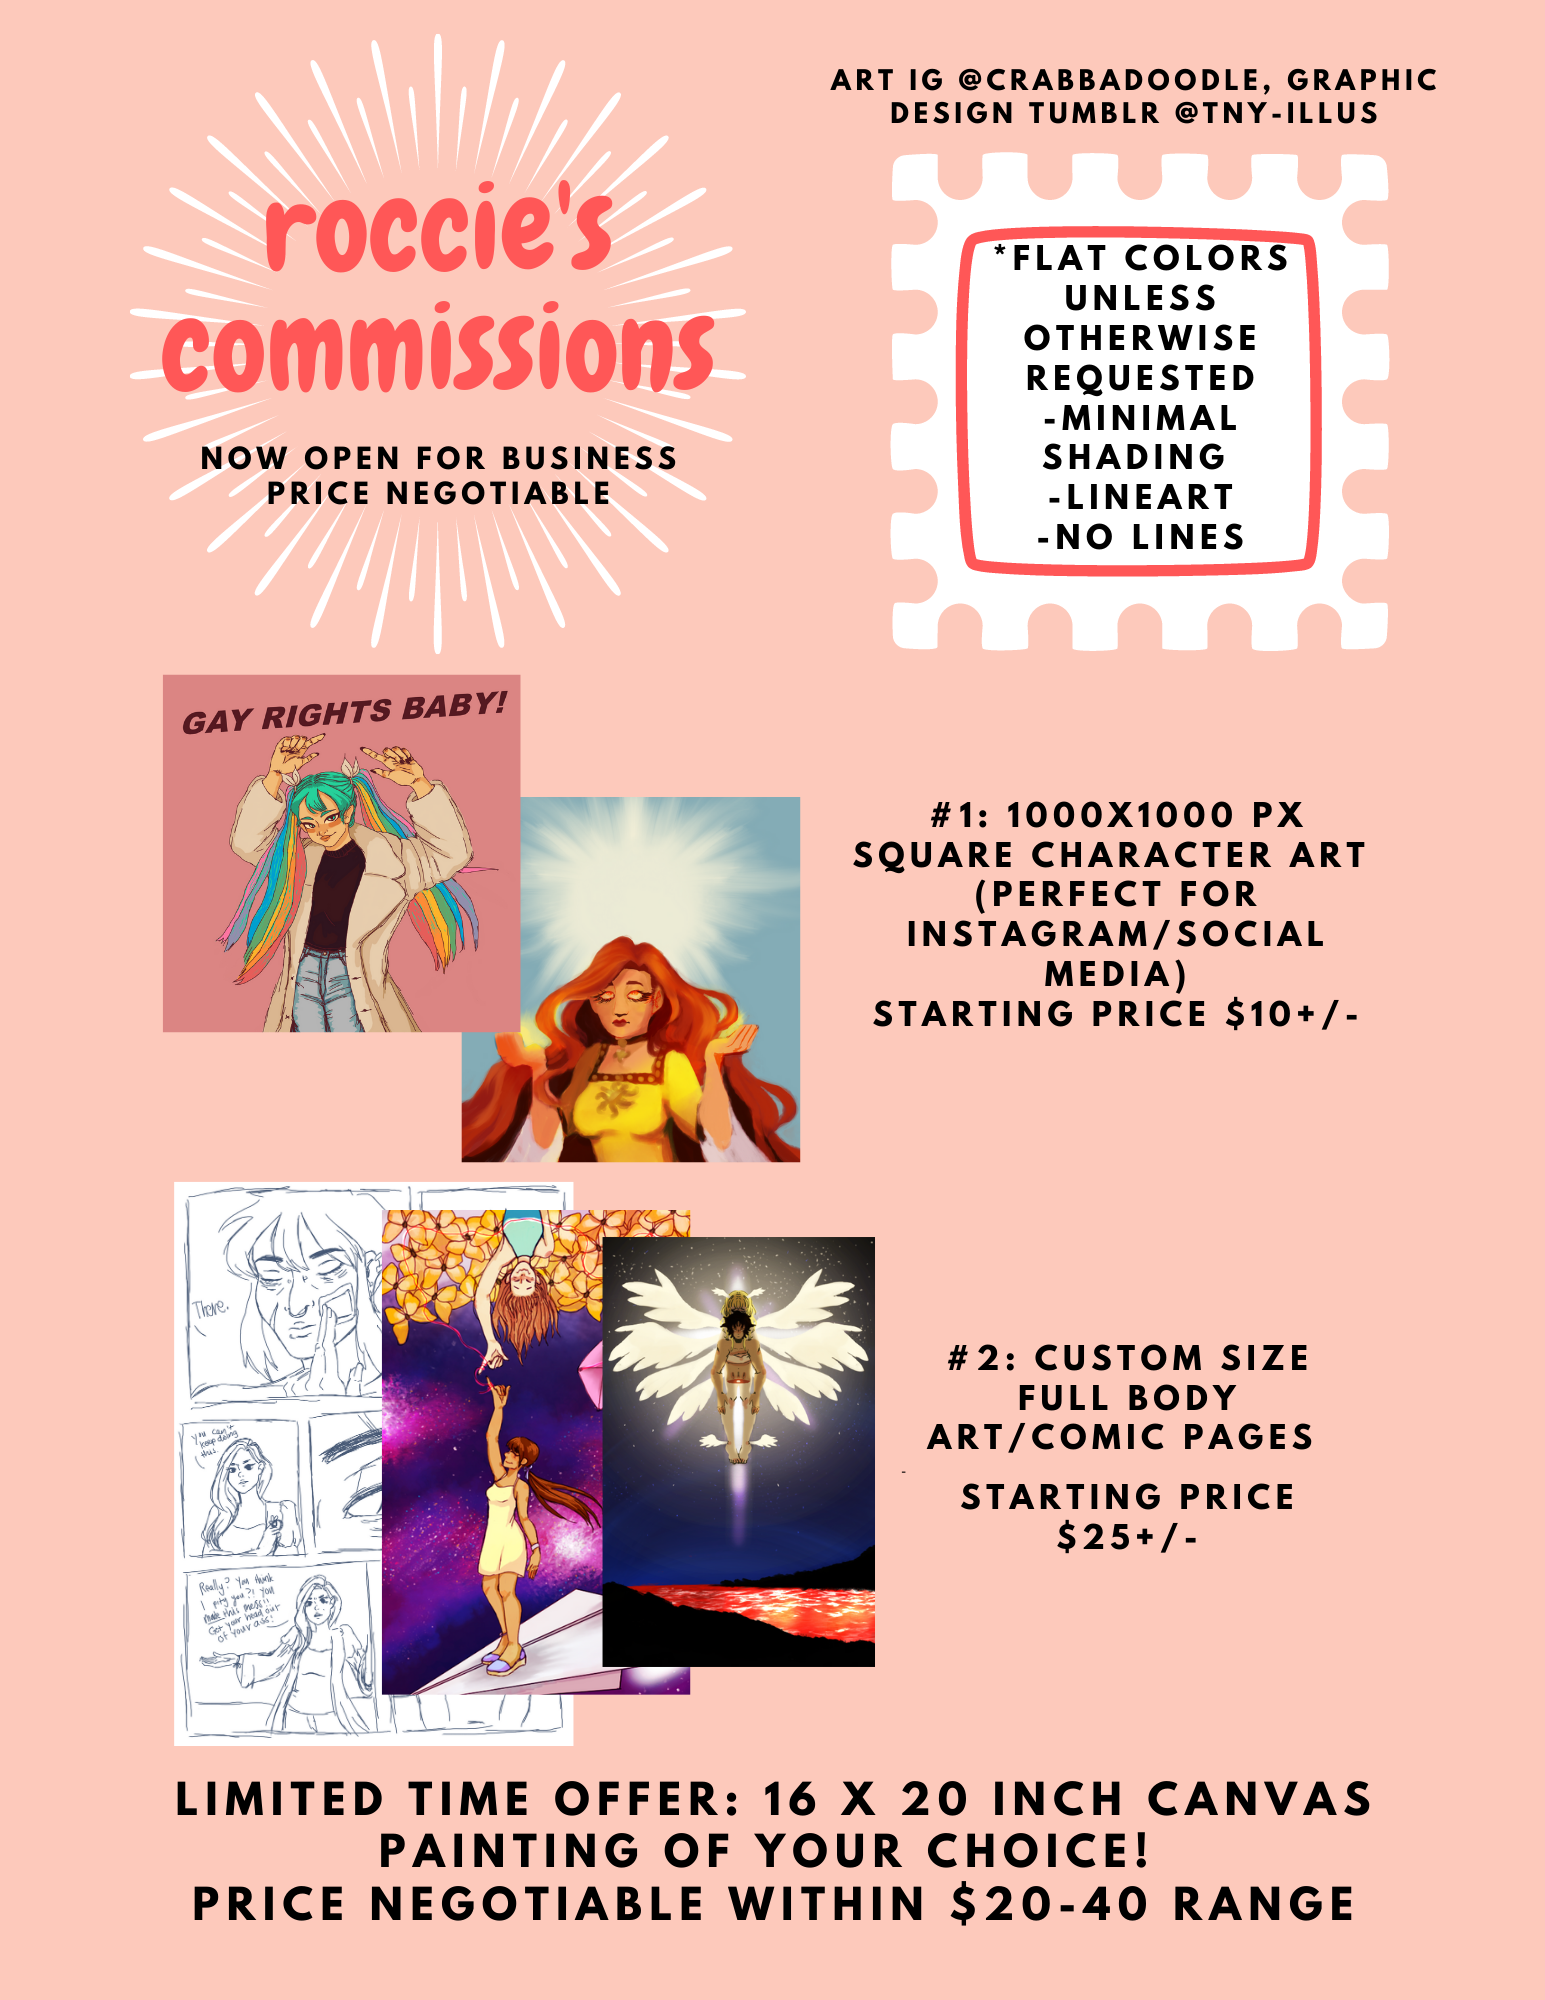 rocky's commission info